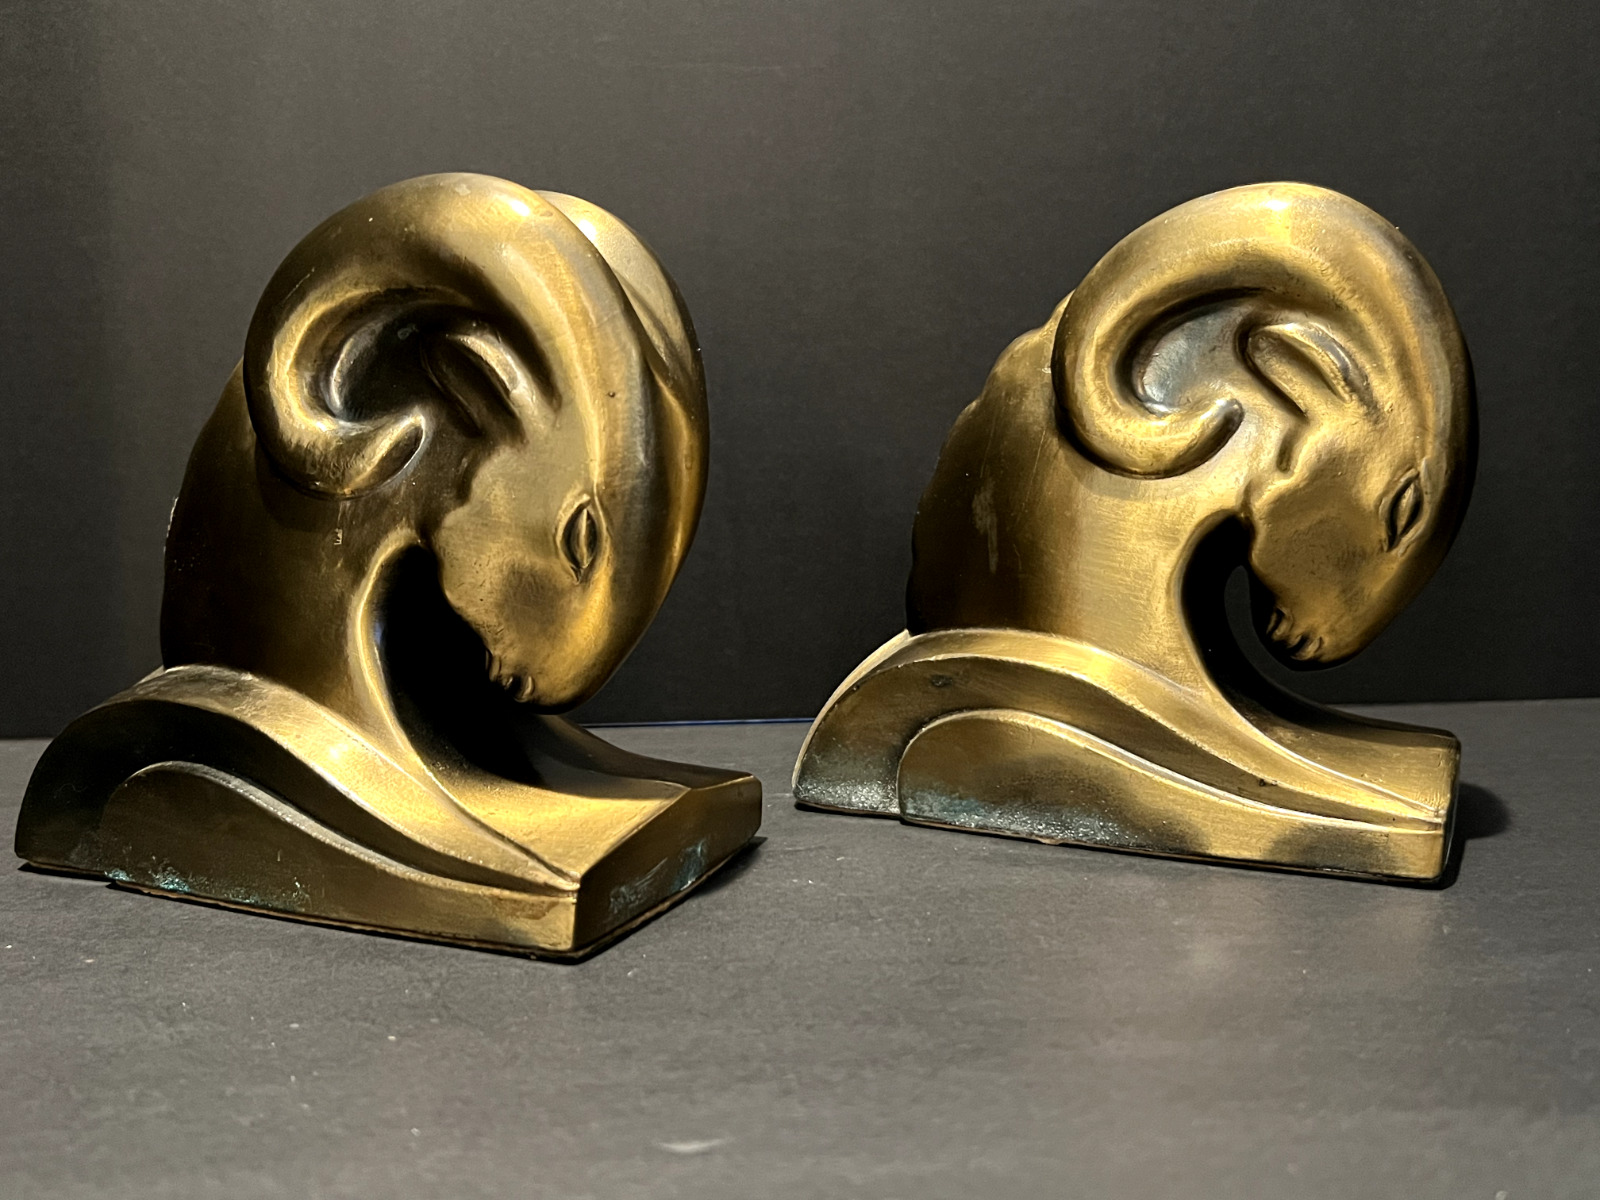 Art Deco Rams Head Bookends Pair by Cornell Foundry - Circa 1930